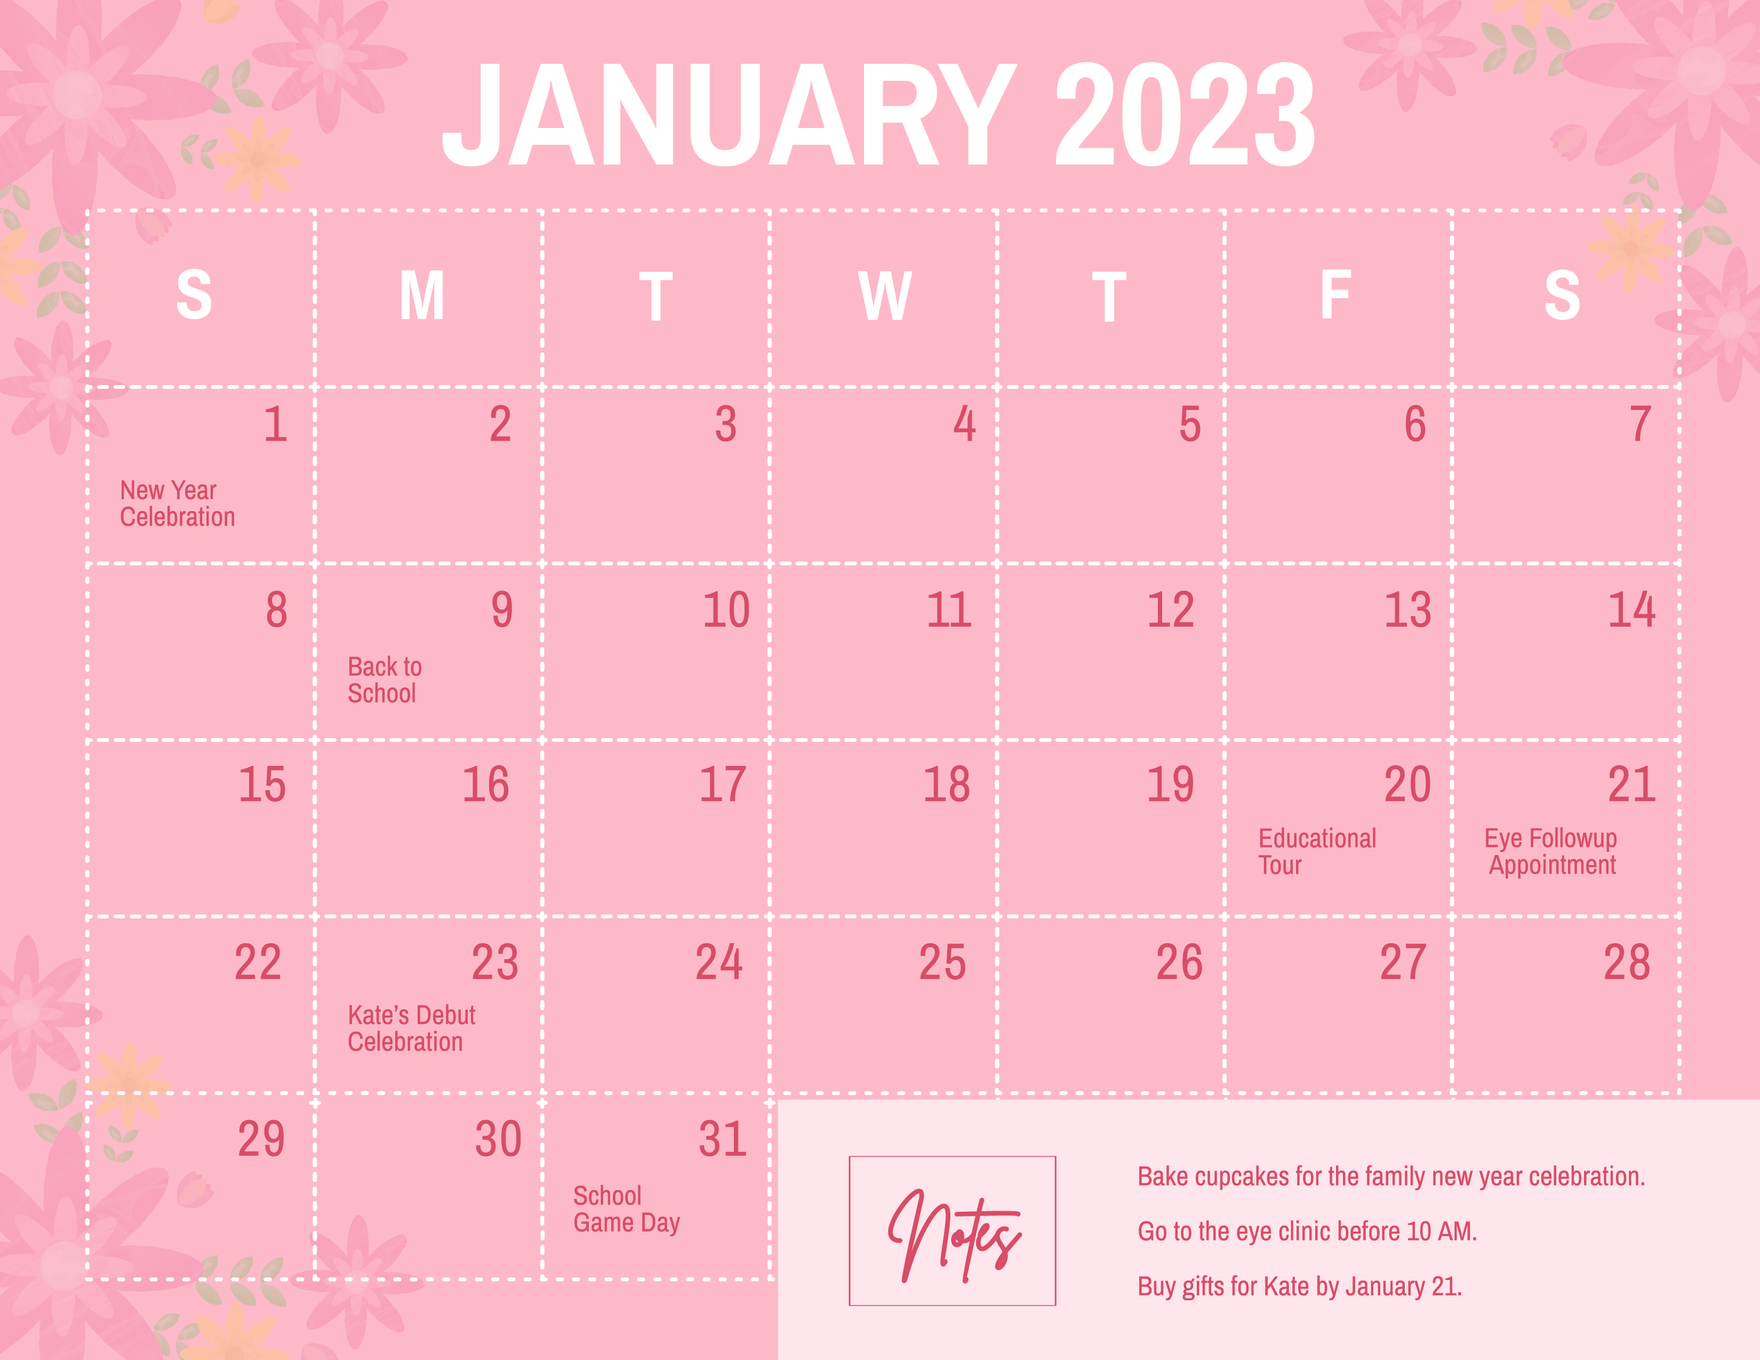 January Calendar Template in PSD FREE Download